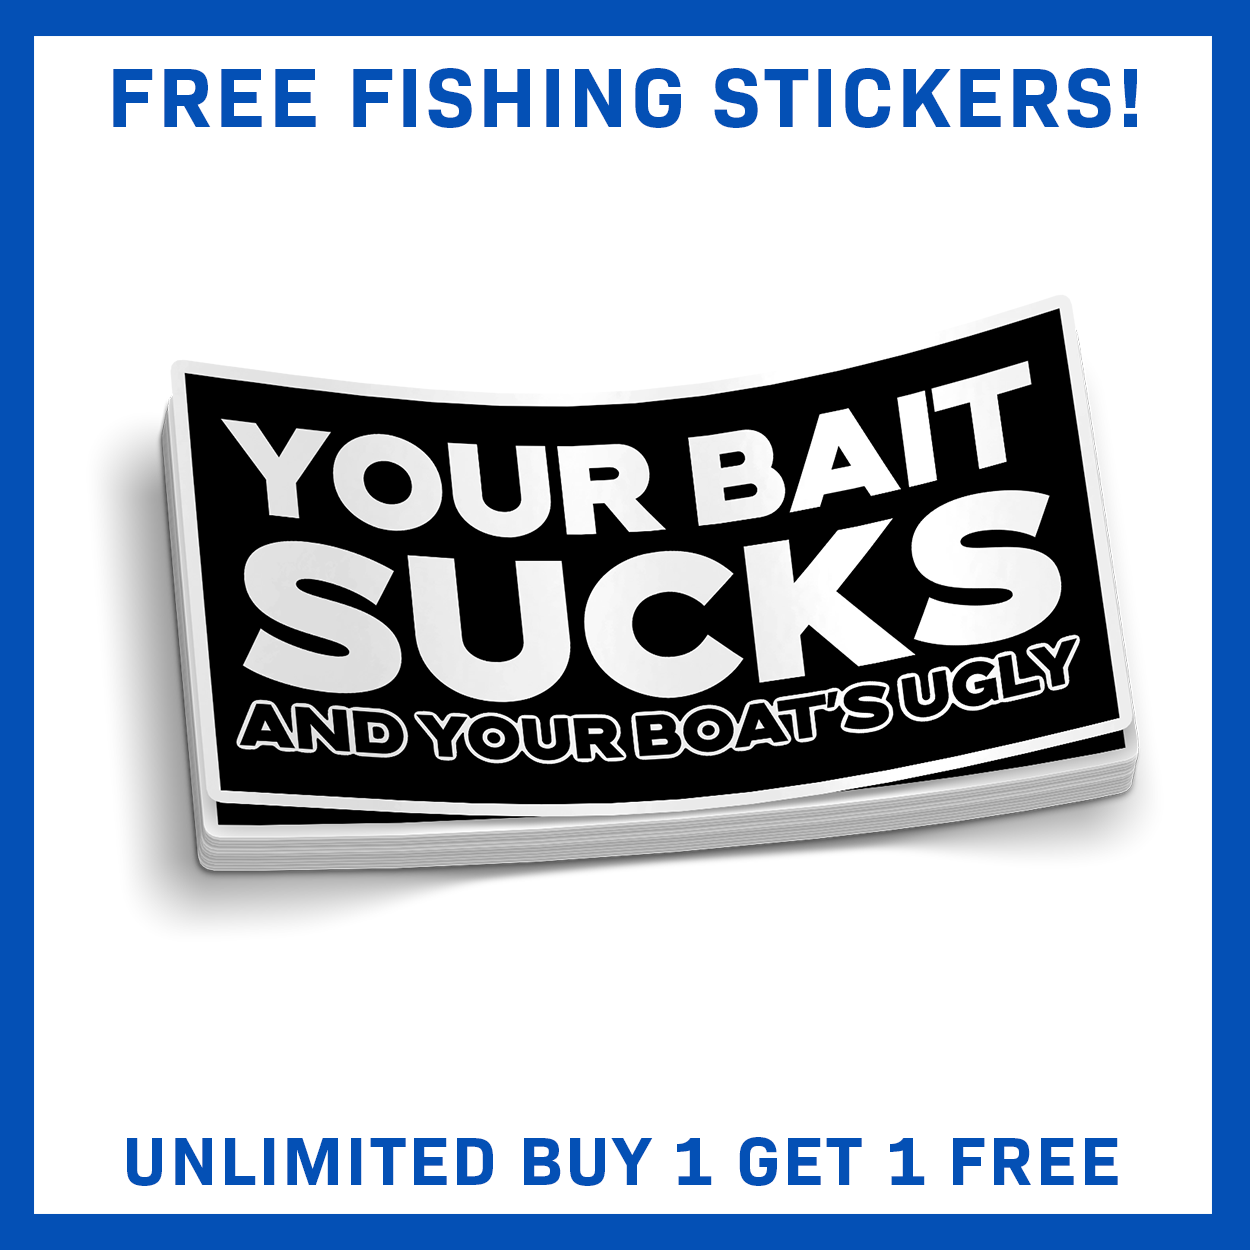 Your Bait Sucks And Your Boat Is Ugly - Funny Fishing Sticker